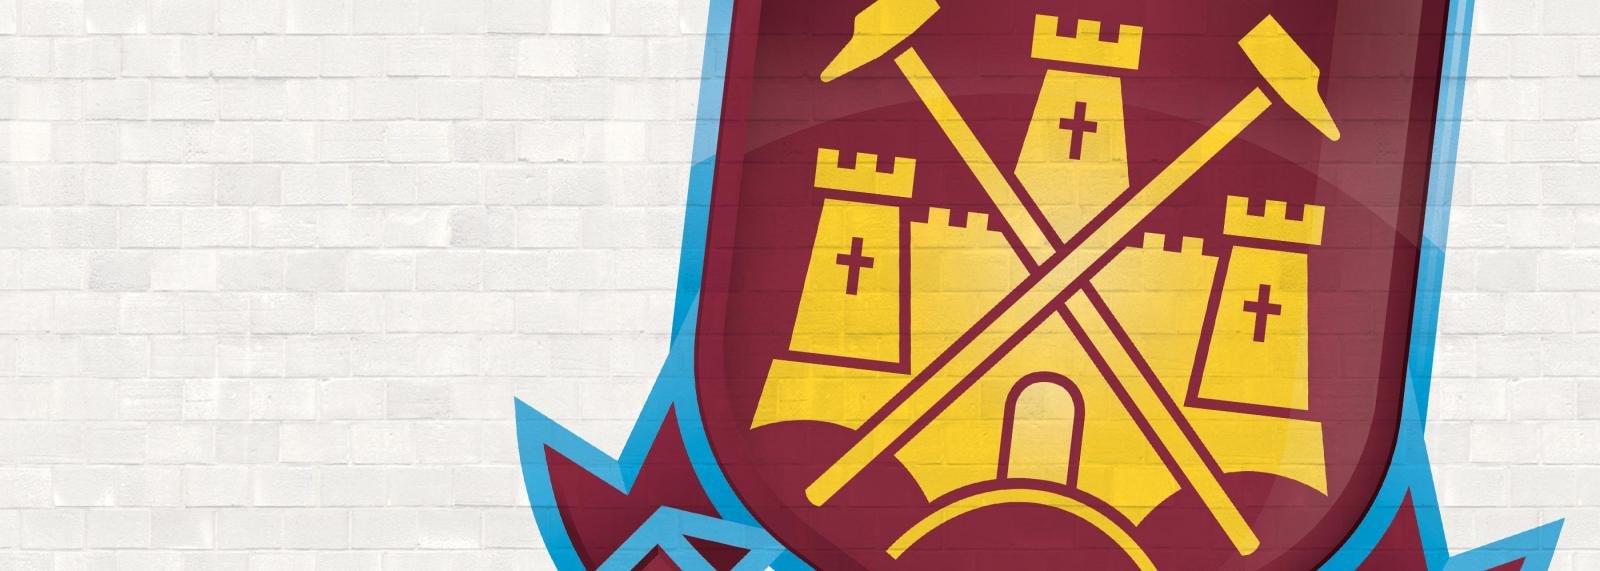 West Ham United’s 2015/16 season was terrific, but next year could be even better